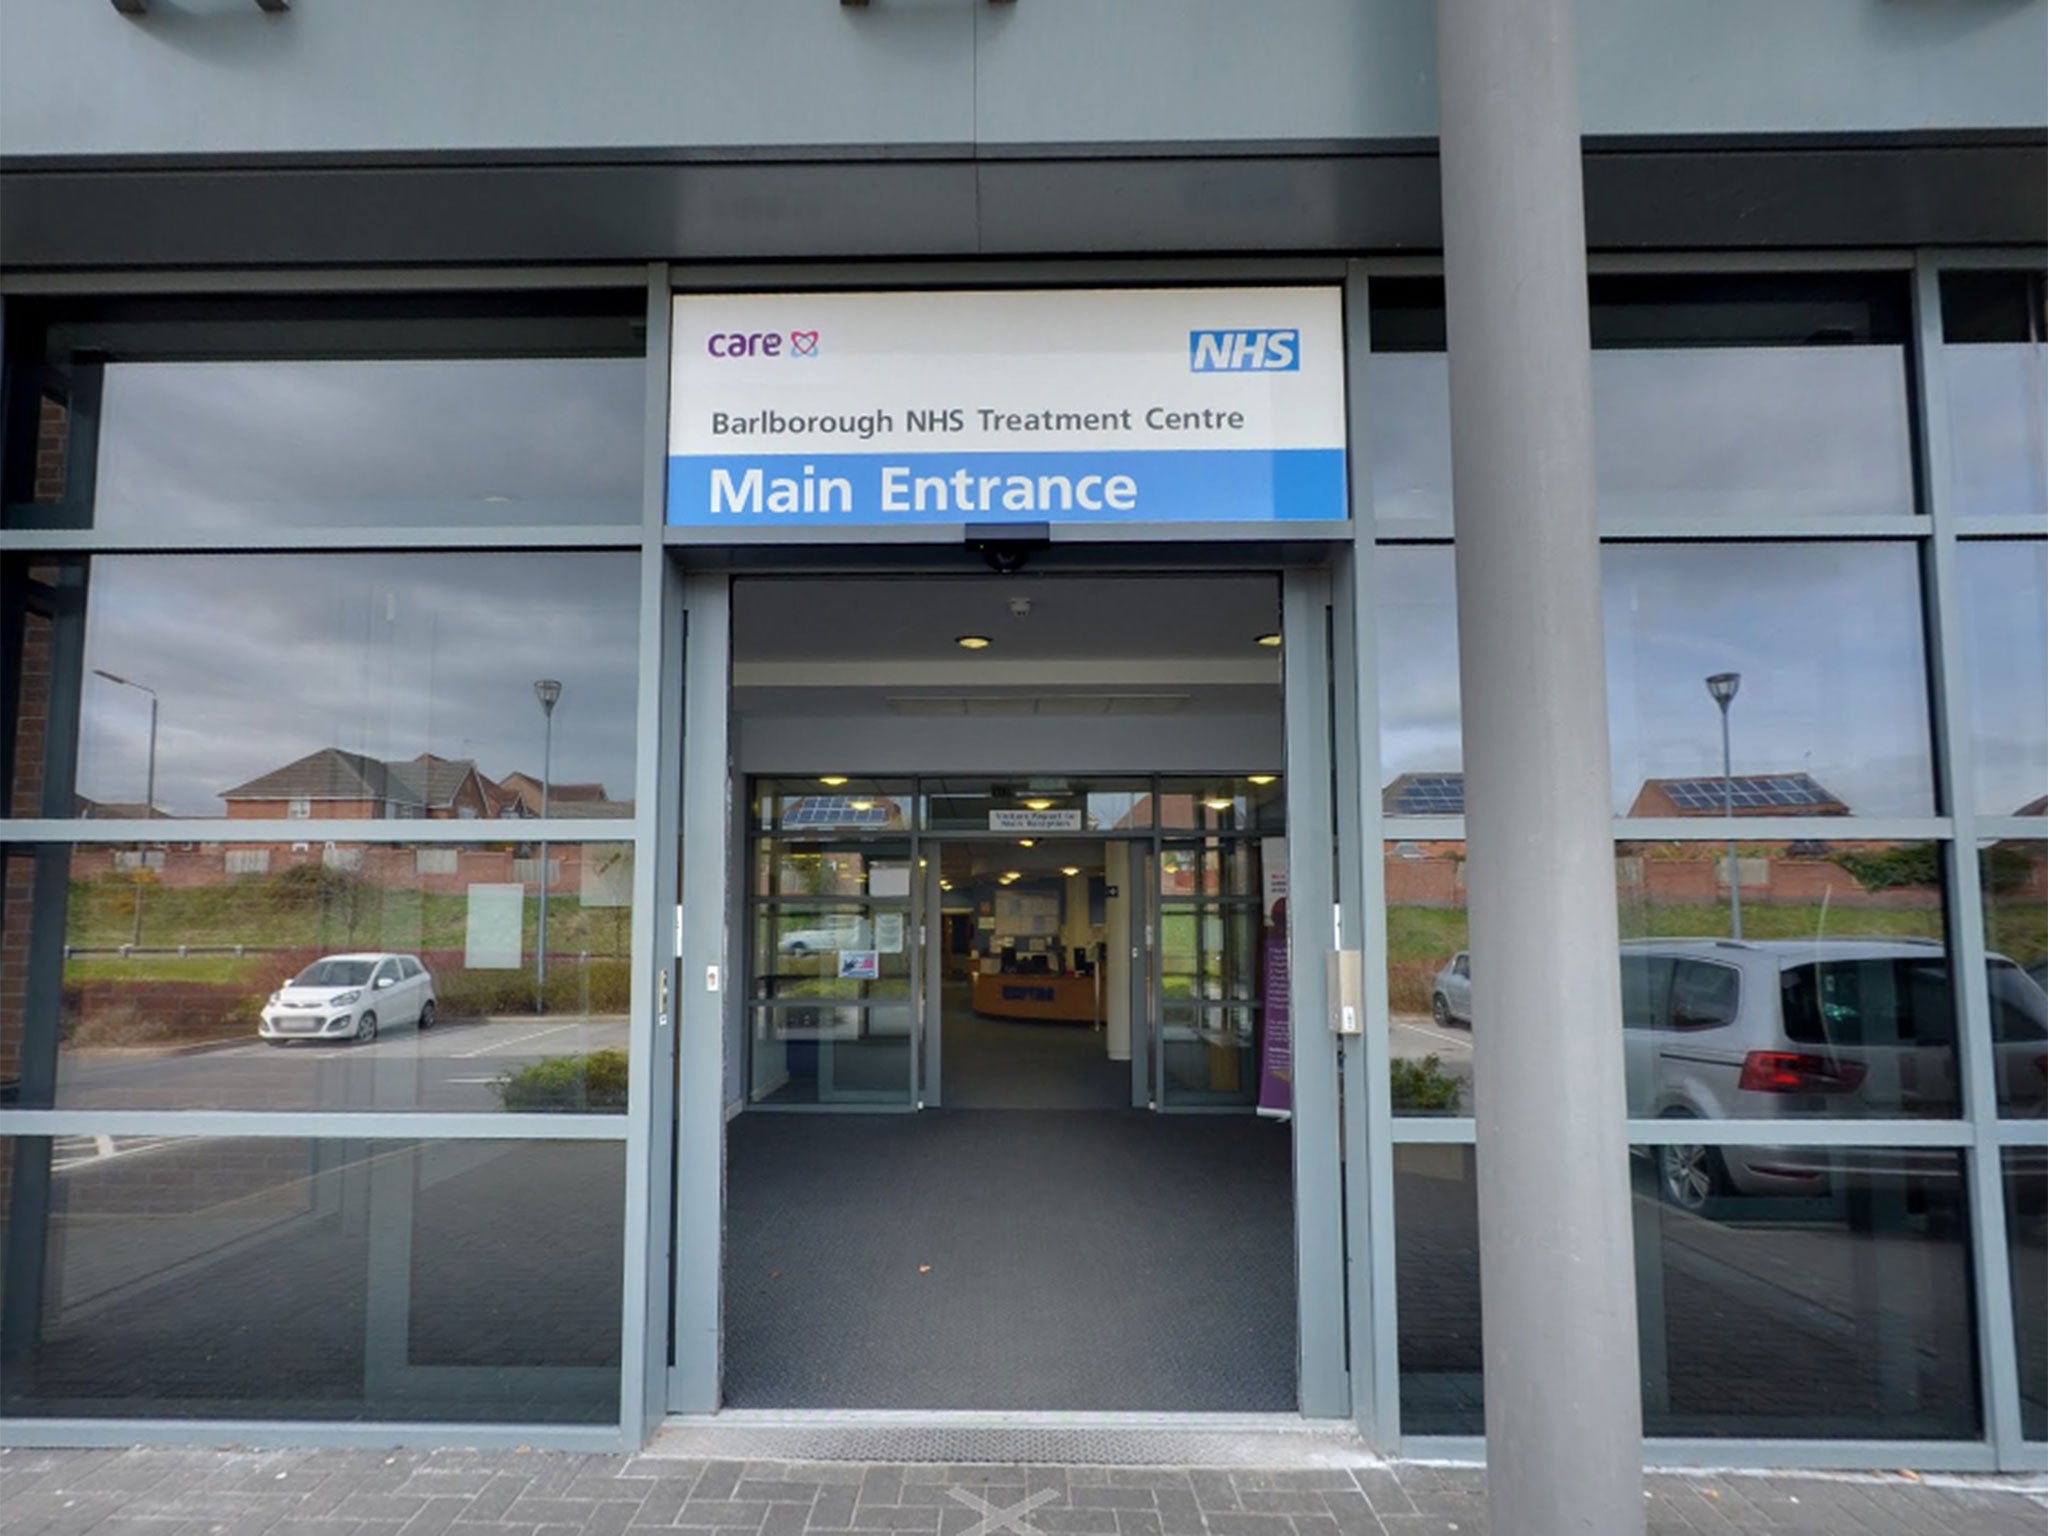 Care UK’s Barlborough NHS Treatment Centre in Chesterfield, Derbyshire, was given an overall rating of 'good', and also a 'good' rating for surgery. Yet in the previous 12 months there had been four serious patient safety incidents that should not occur